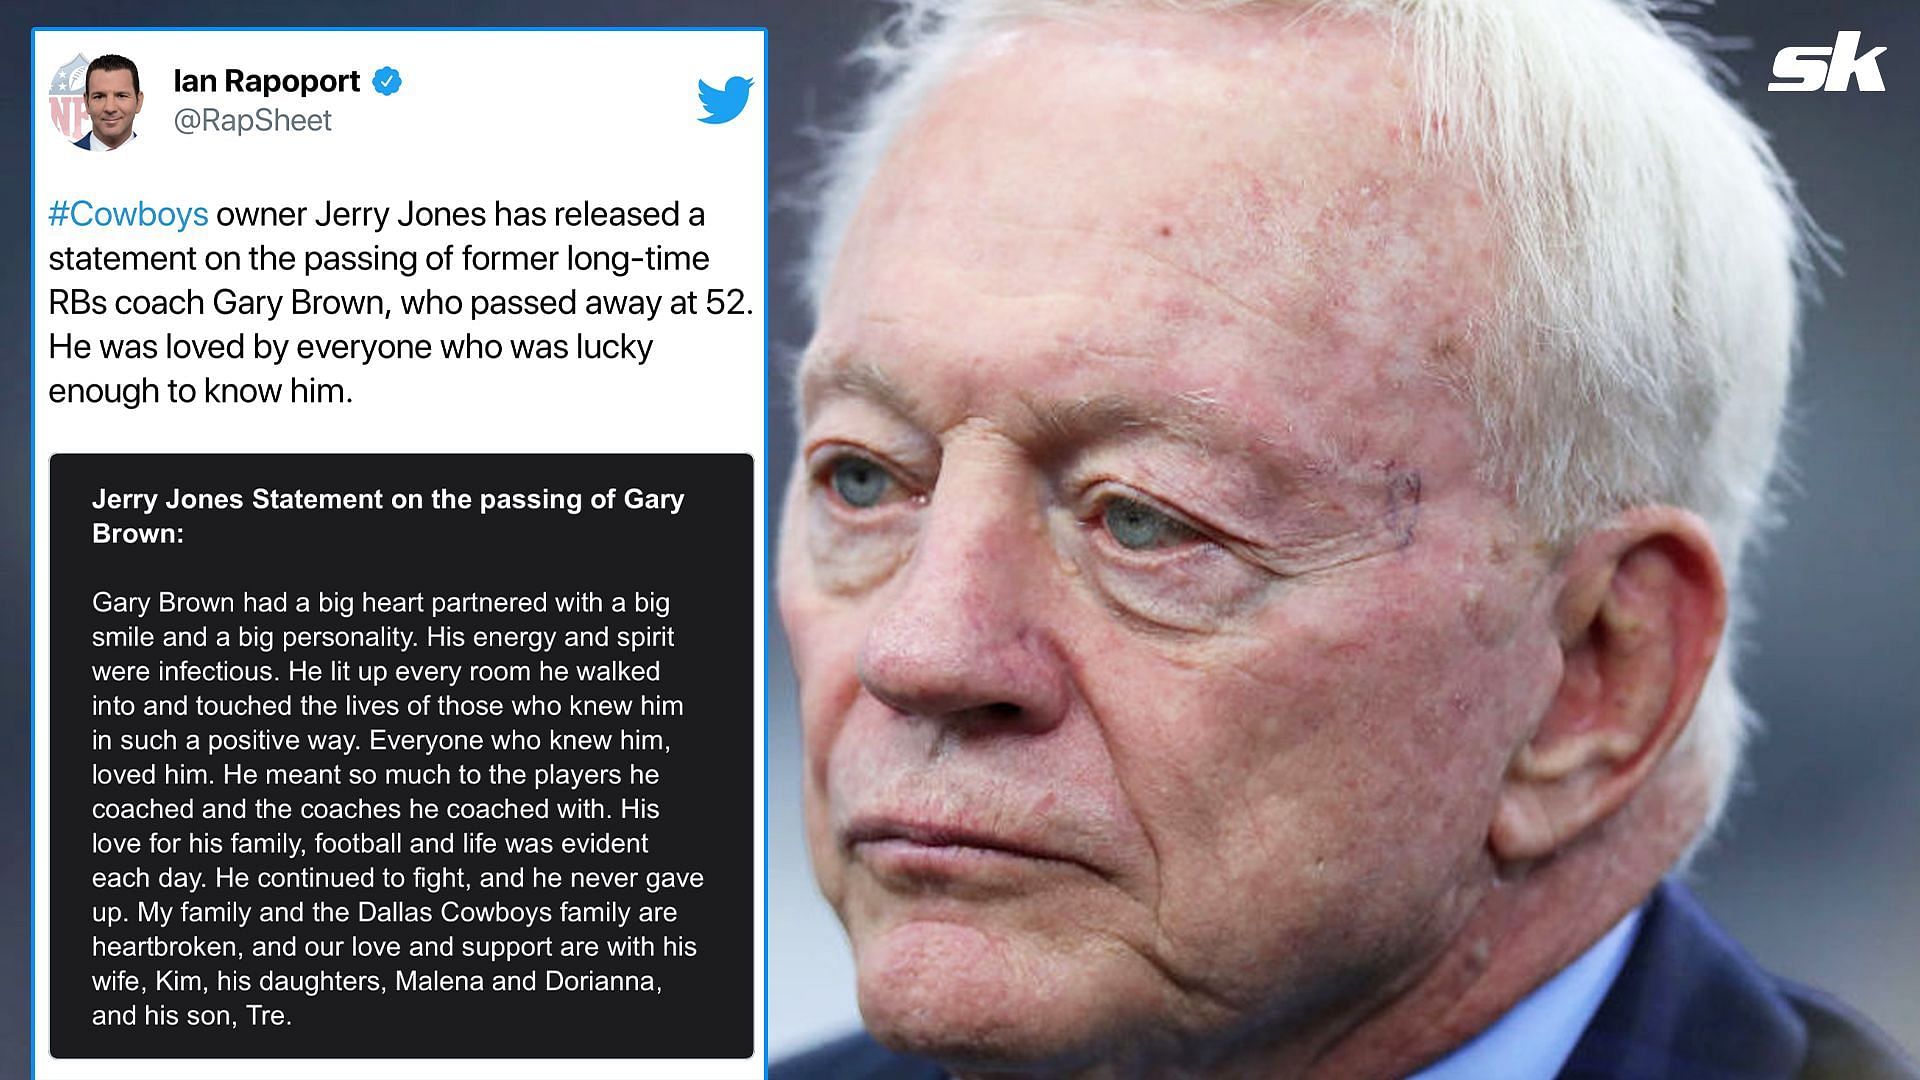 Dallas Cowboys owner Jerry Jones released a statment following the death of Gary Brown, who passed away at the age of 52